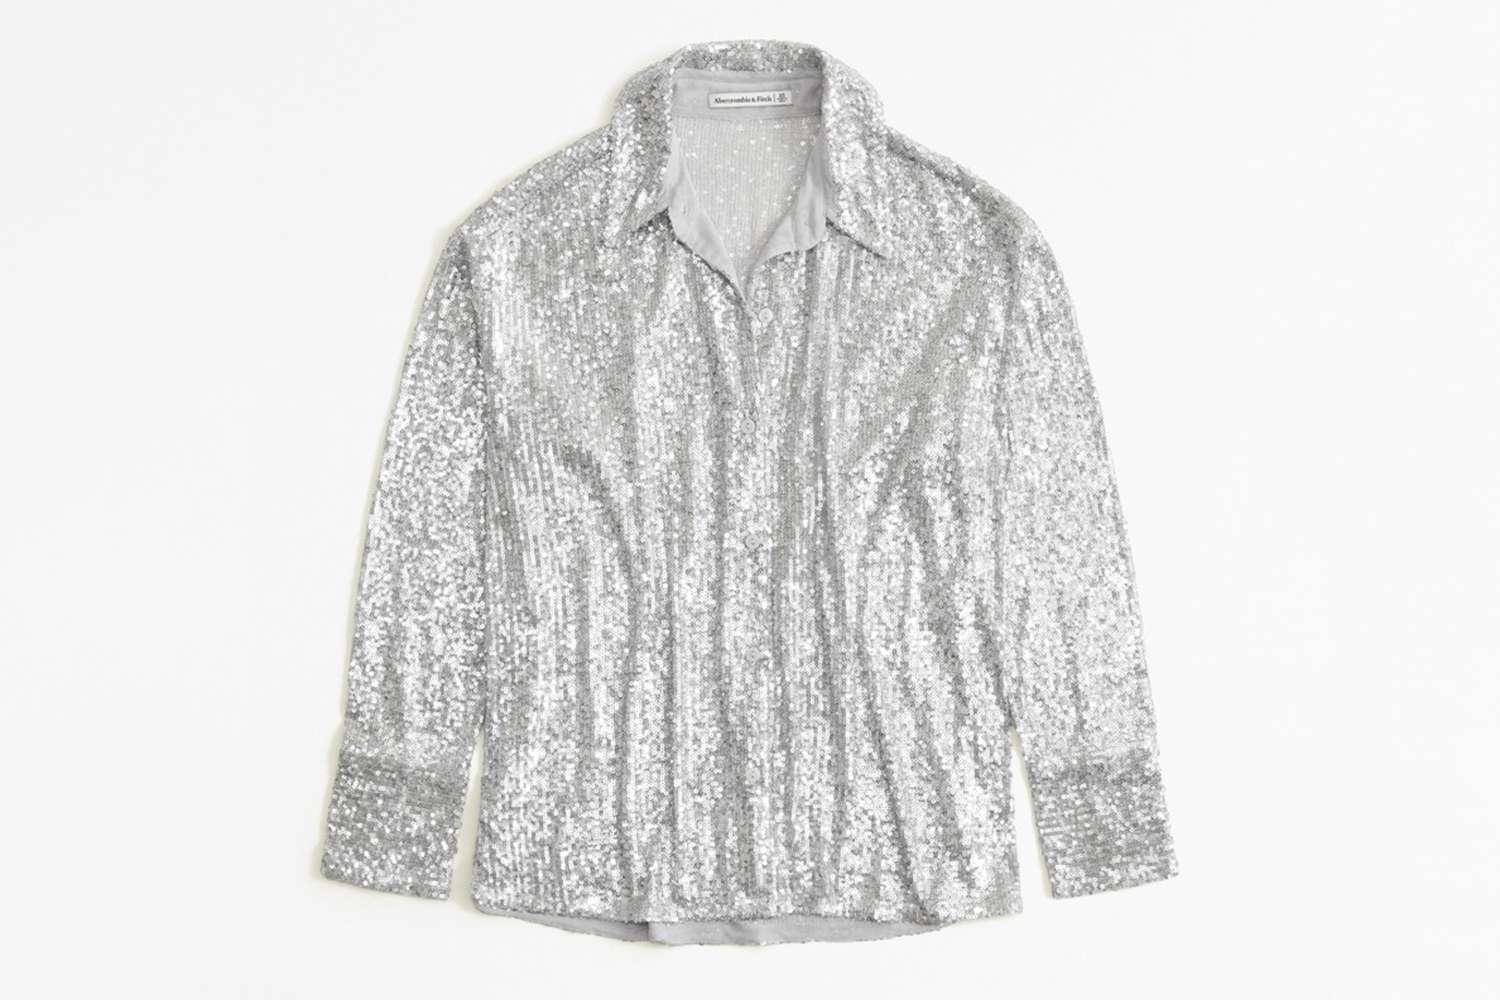 Abercrombie & Fitch Long-Sleeve Sequin Button-Up Shirt